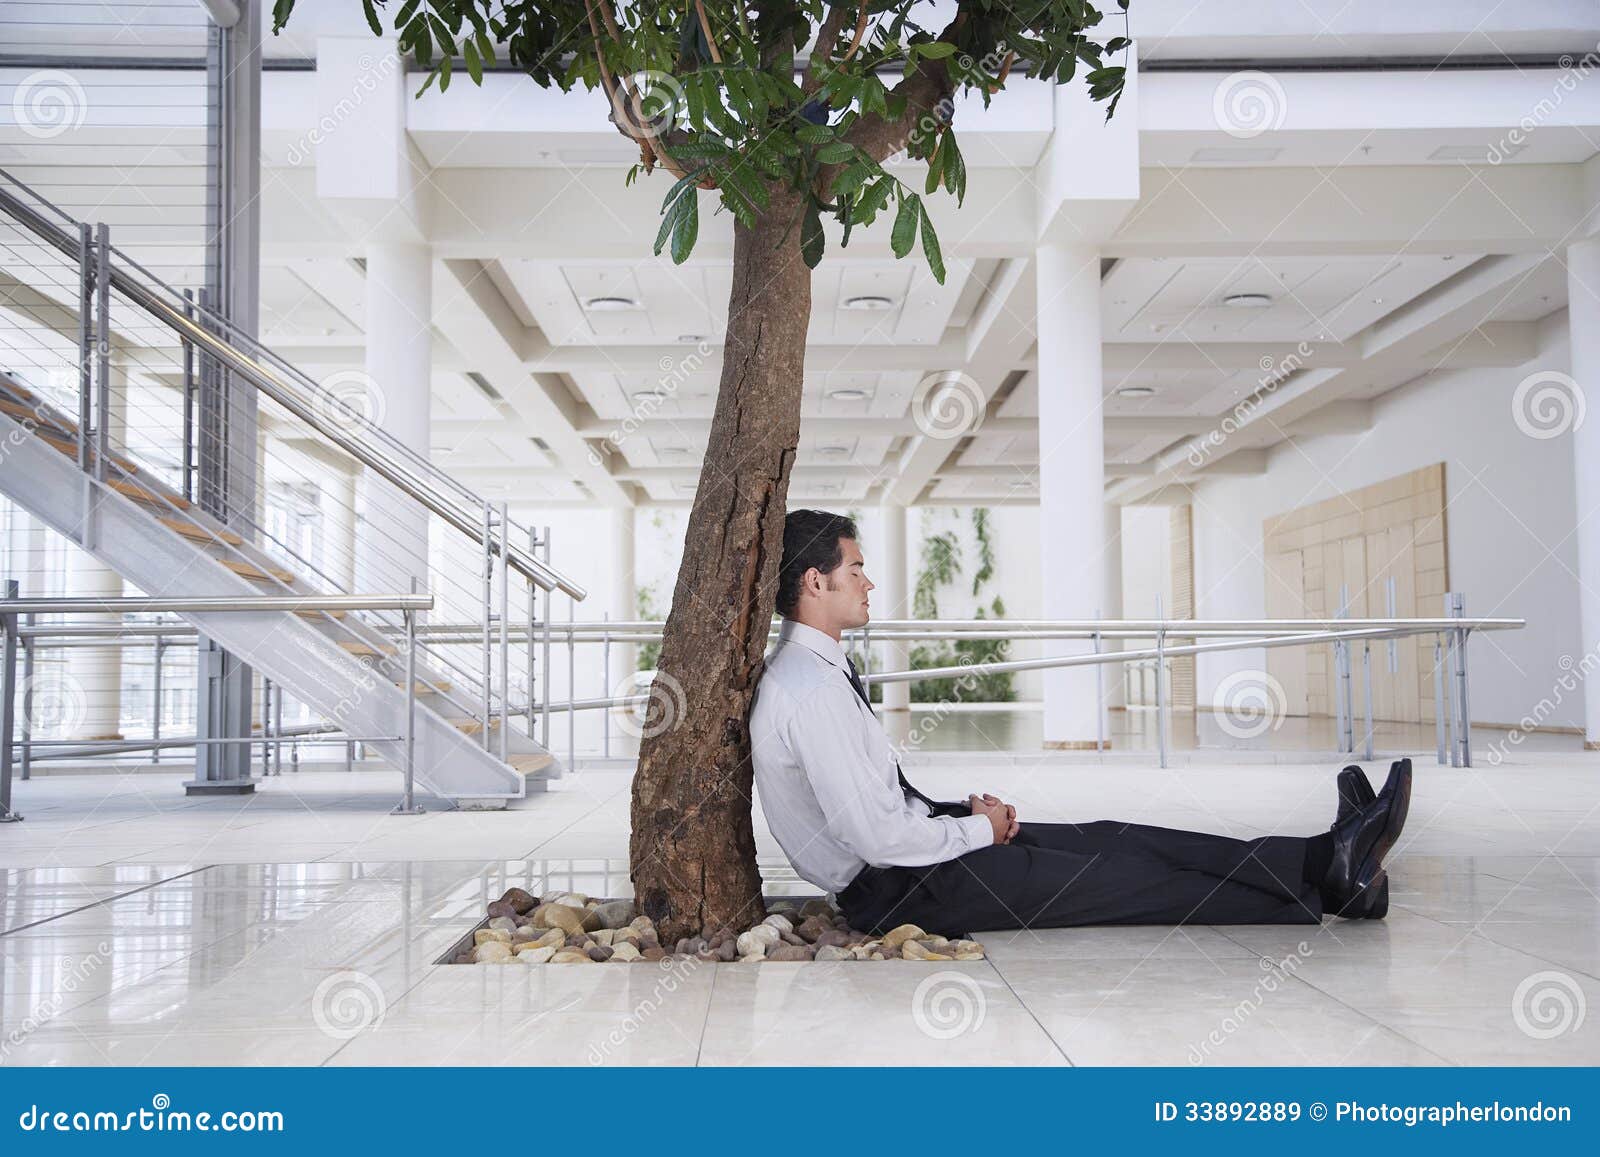 Businessman Relaxing Under Tree in Office Stock Image - Image of formal,  resting: 33892889